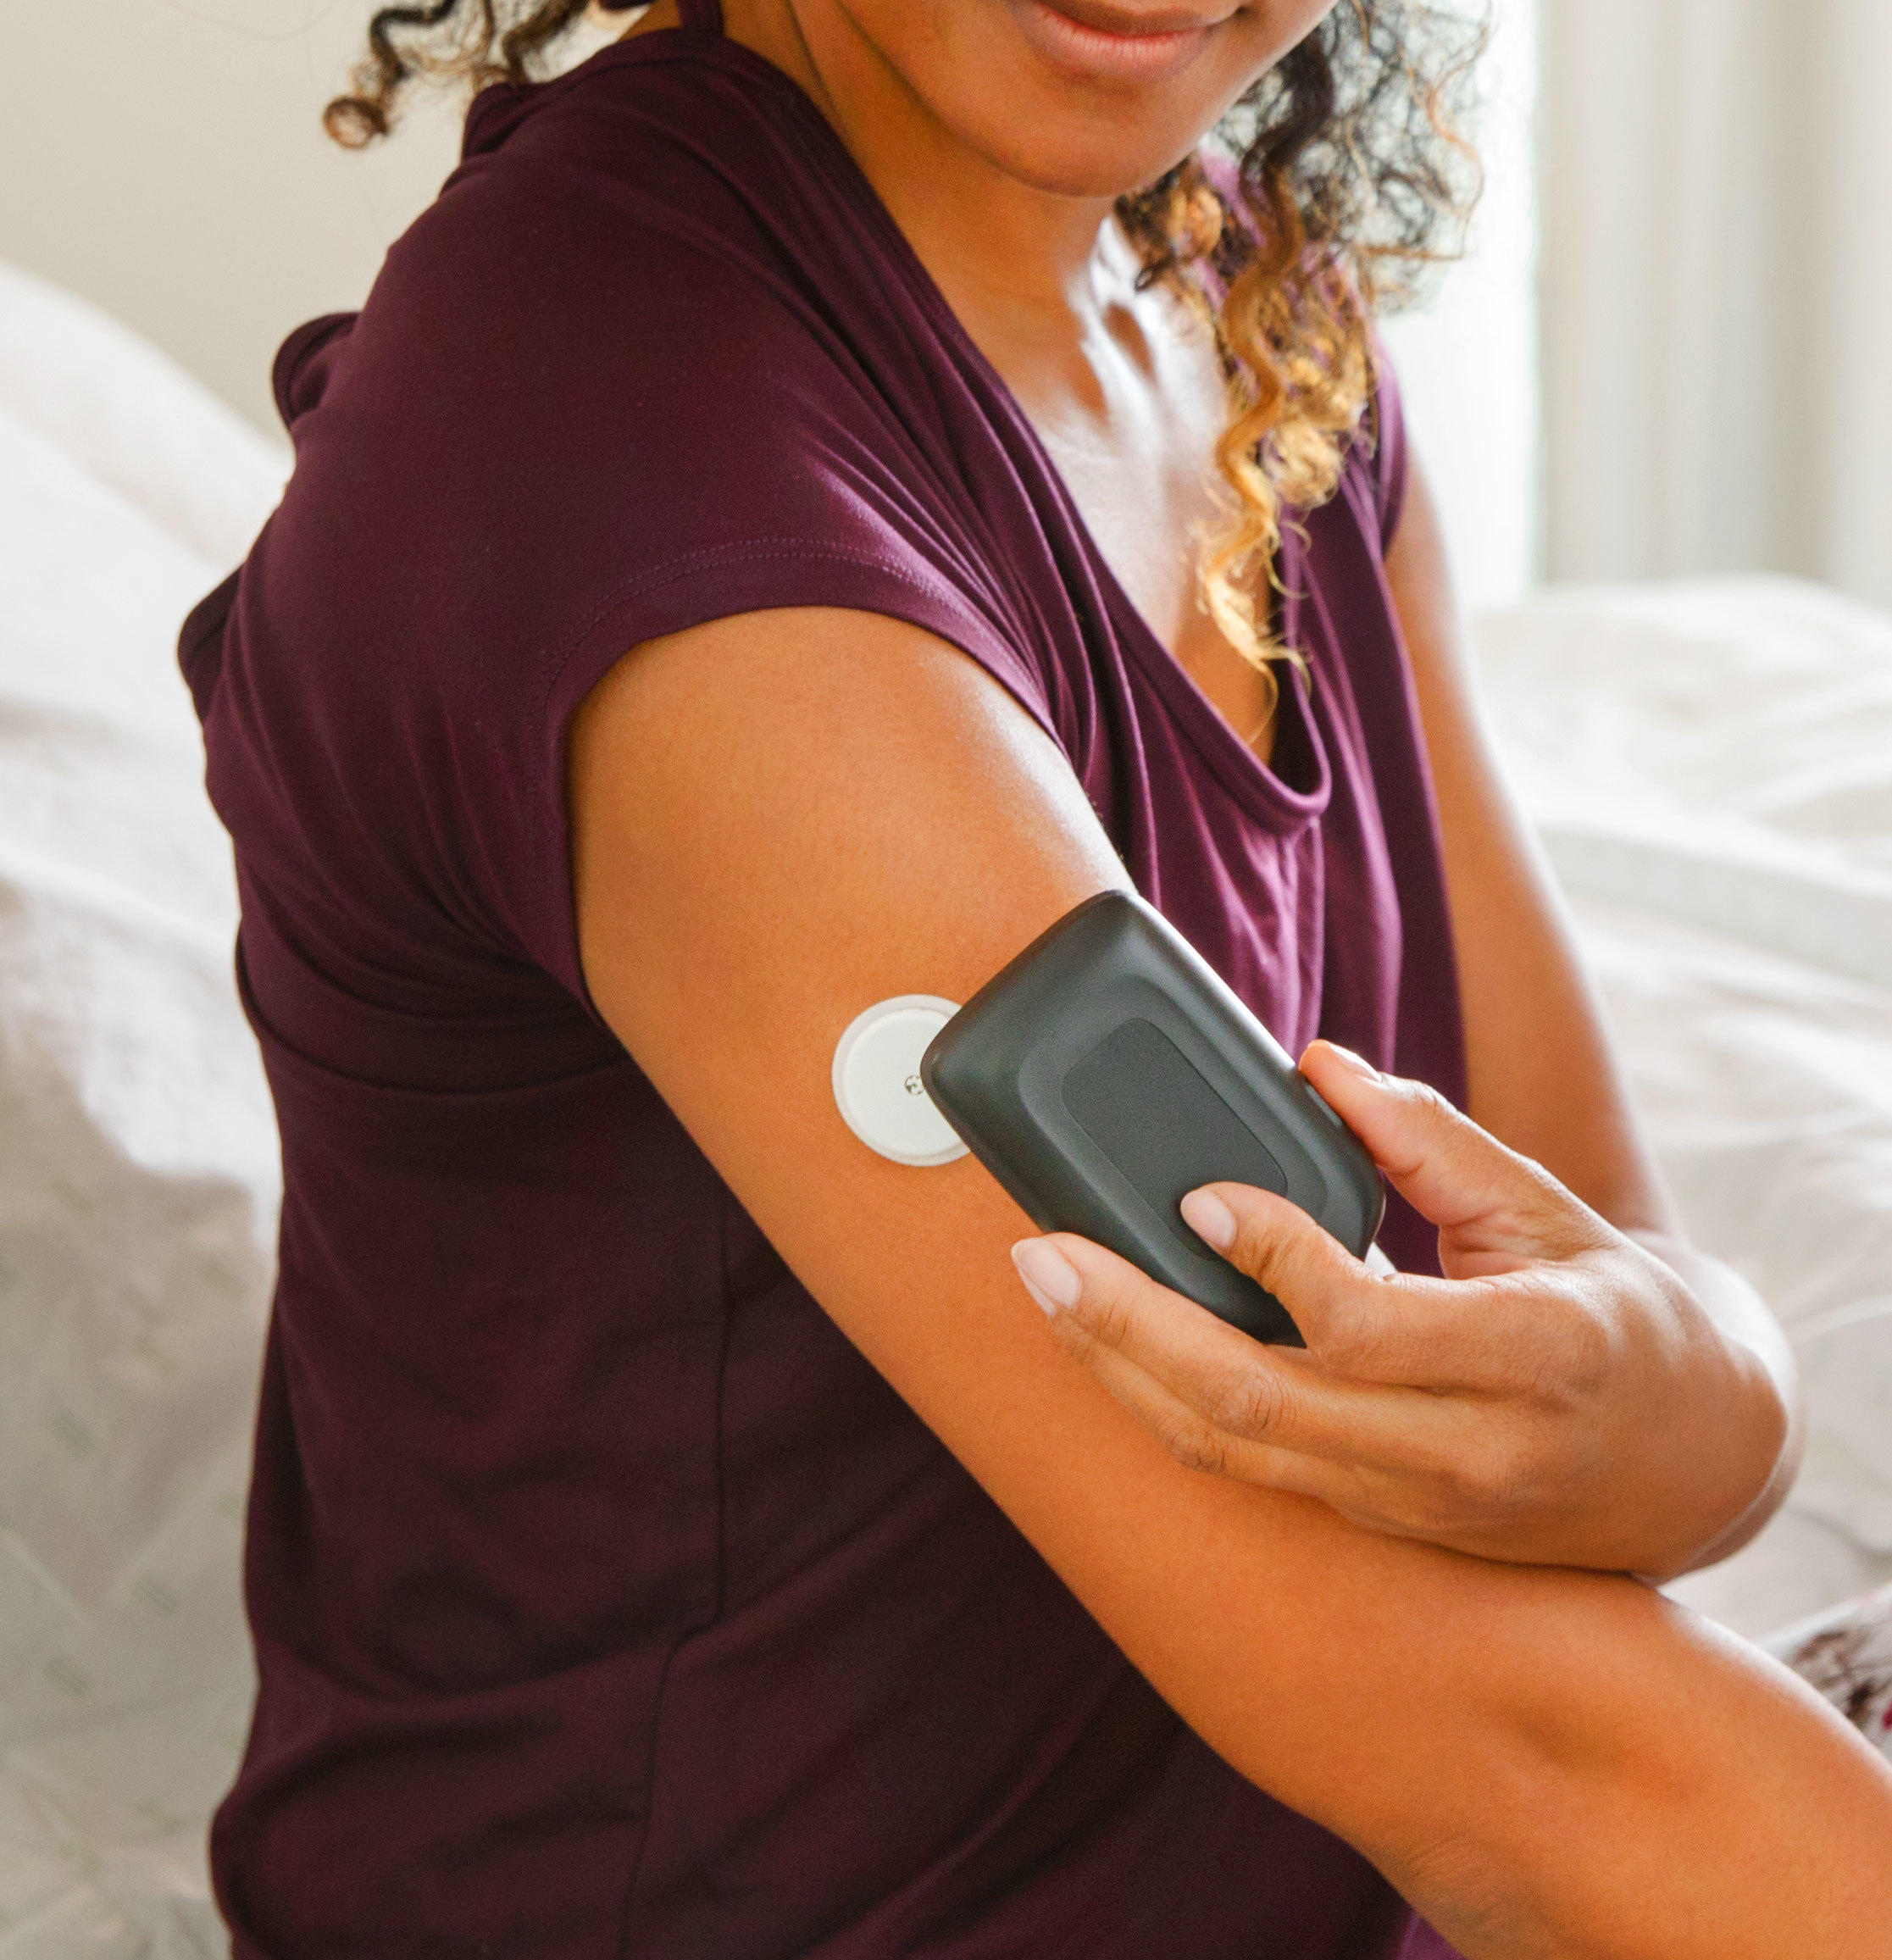 Diabetes Technology Moves Closer To Making Life Easier For Patients ...